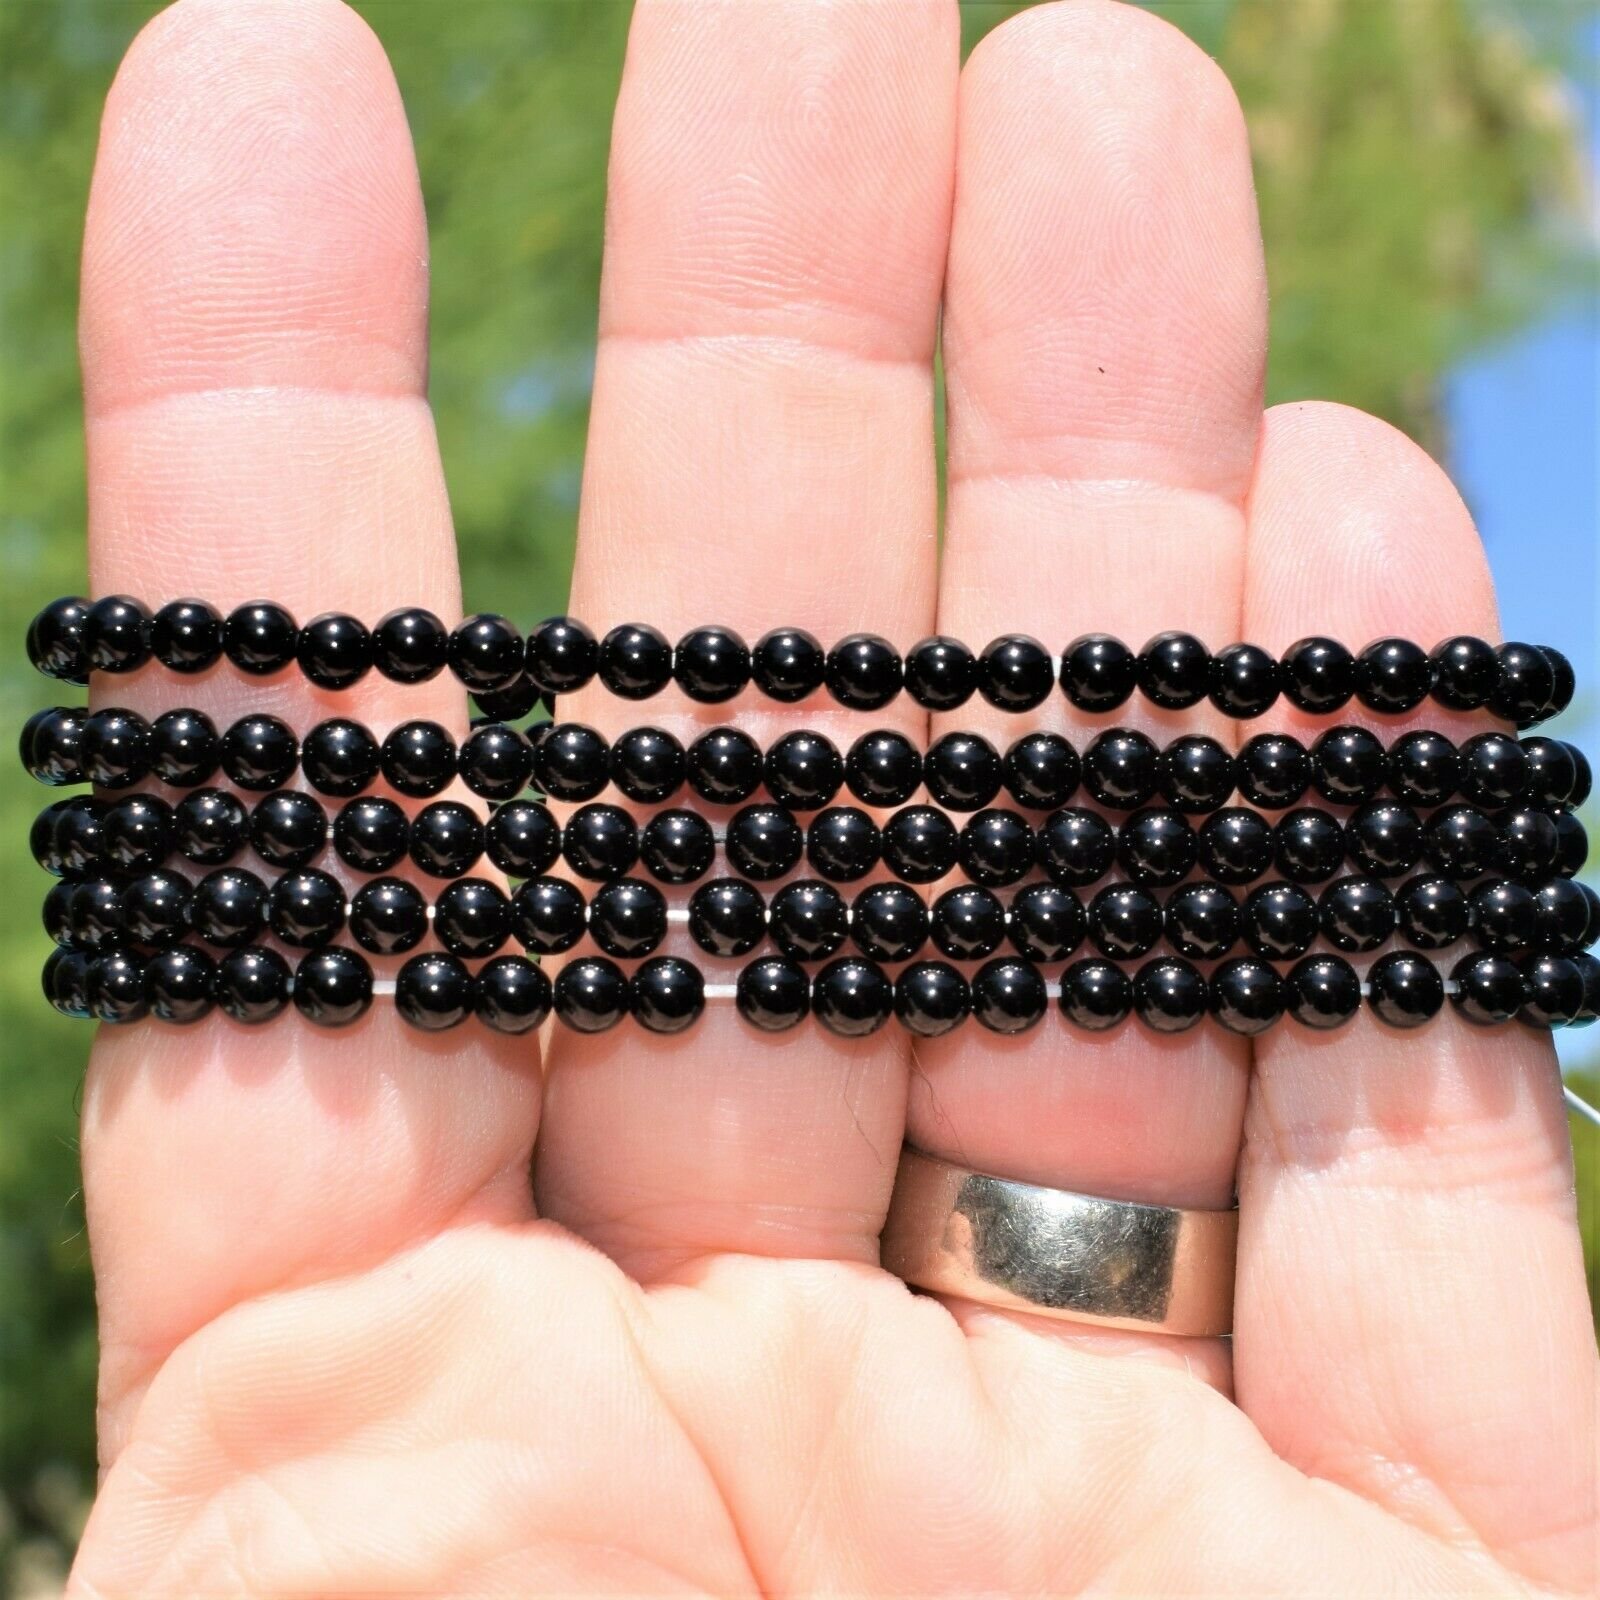 thumbnail 24  - Selenite Charged Black Tourmaline Crystal 4mm Bead Bracelet (other choices)